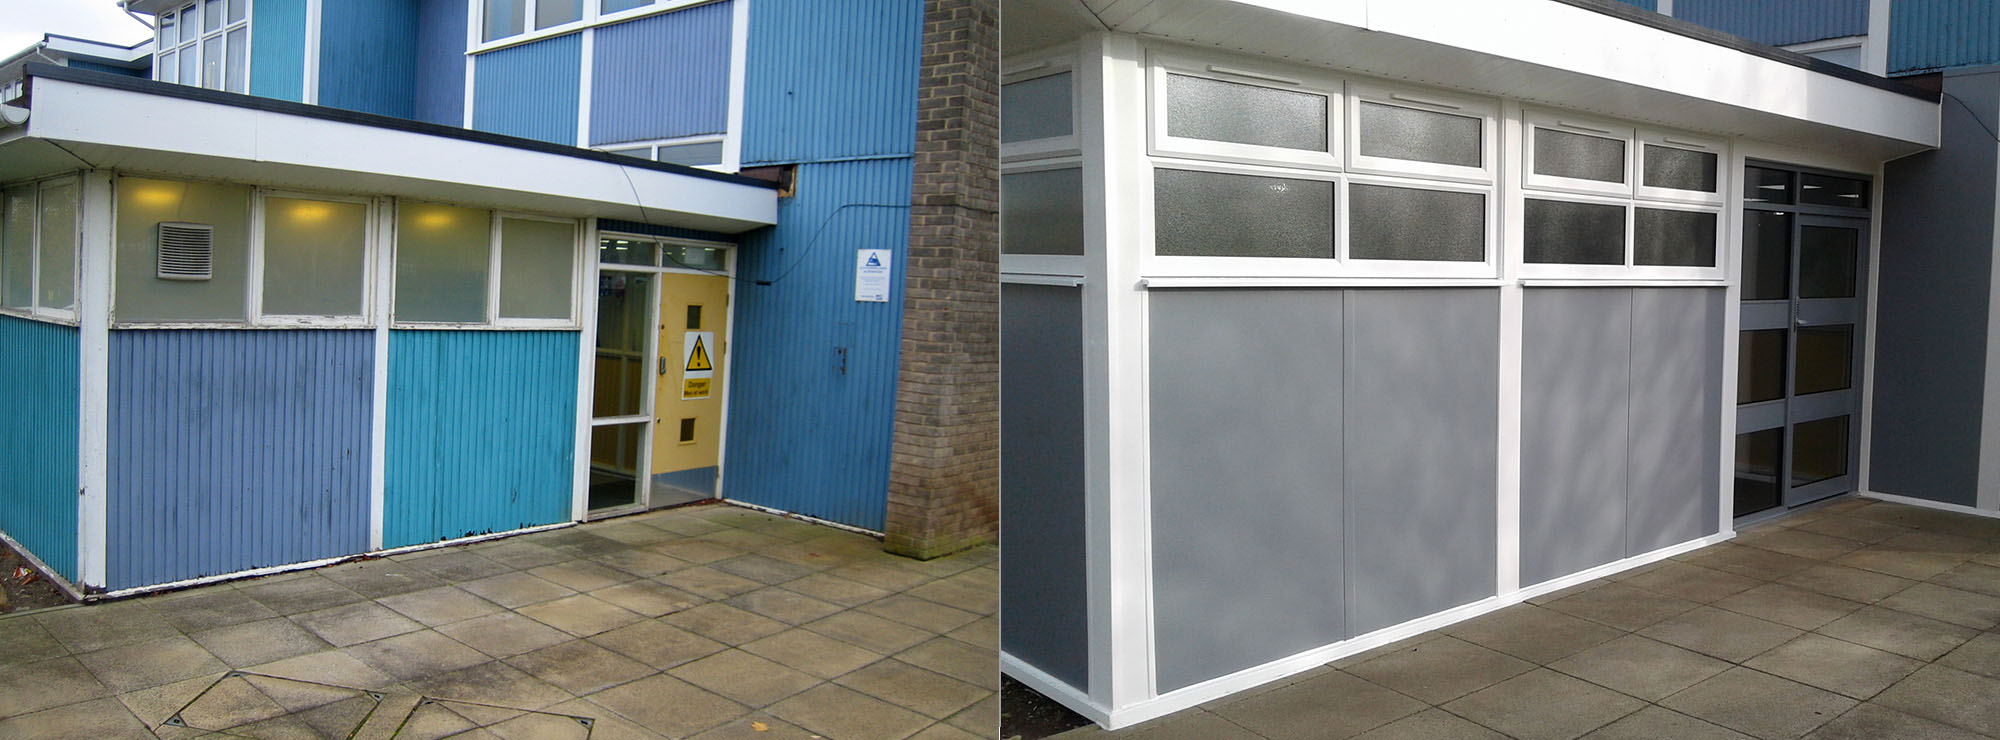 <strong>Primary School in West Midlands.</strong>Replacement existing timber cladding, windows and doors with commercial grey aluminium doors, aluminium faced insulated grey panels and white UPVC windows.